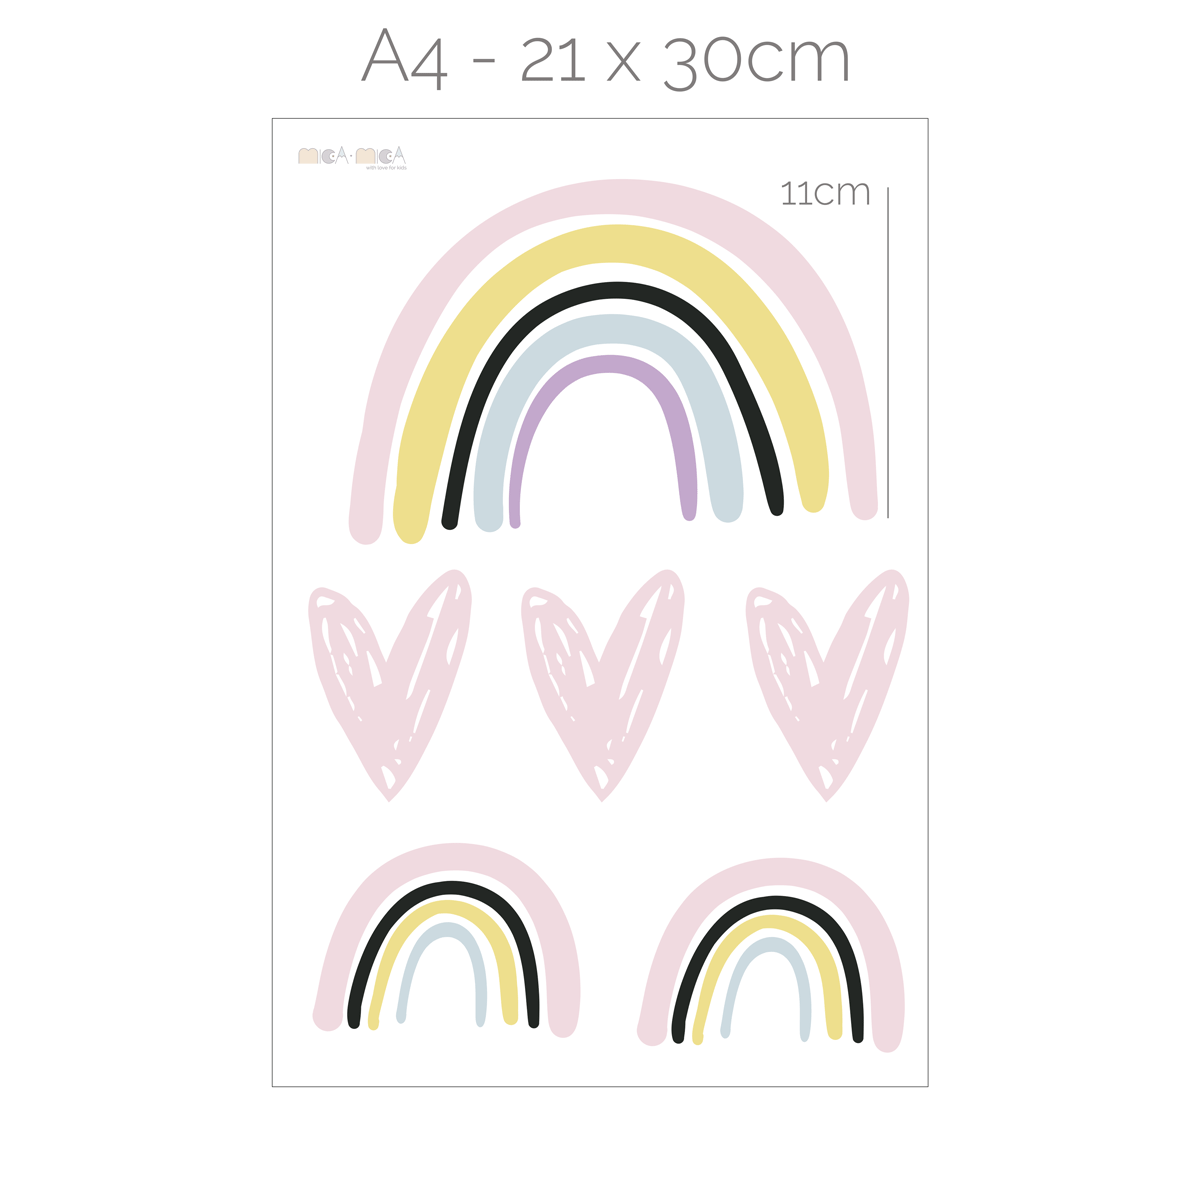 Rainbow wall stickers with hearts